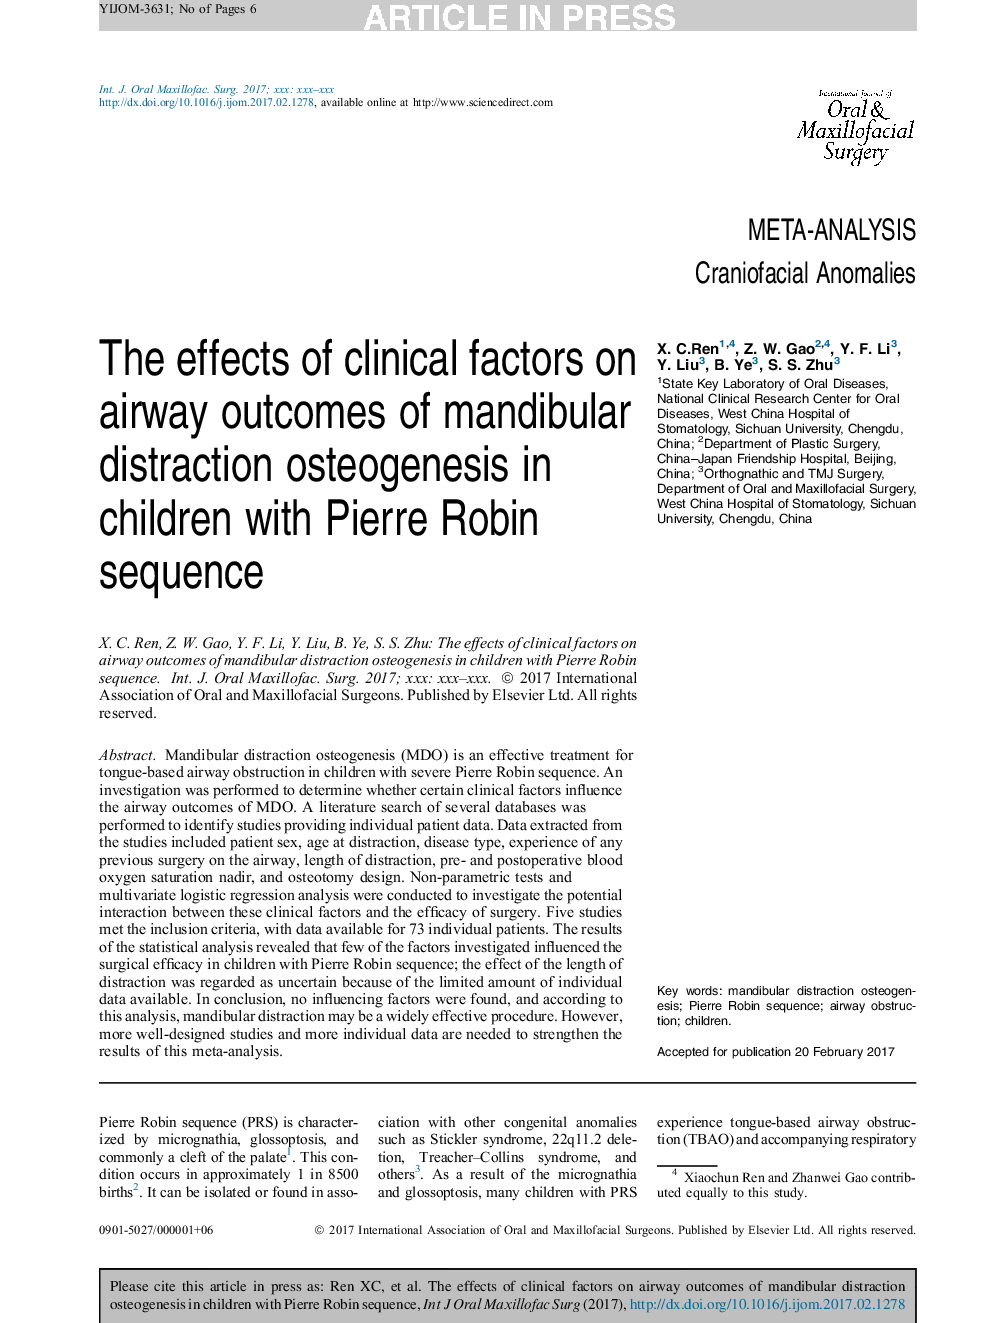 The effects of clinical factors on airway outcomes of mandibular distraction osteogenesis in children with Pierre Robin sequence